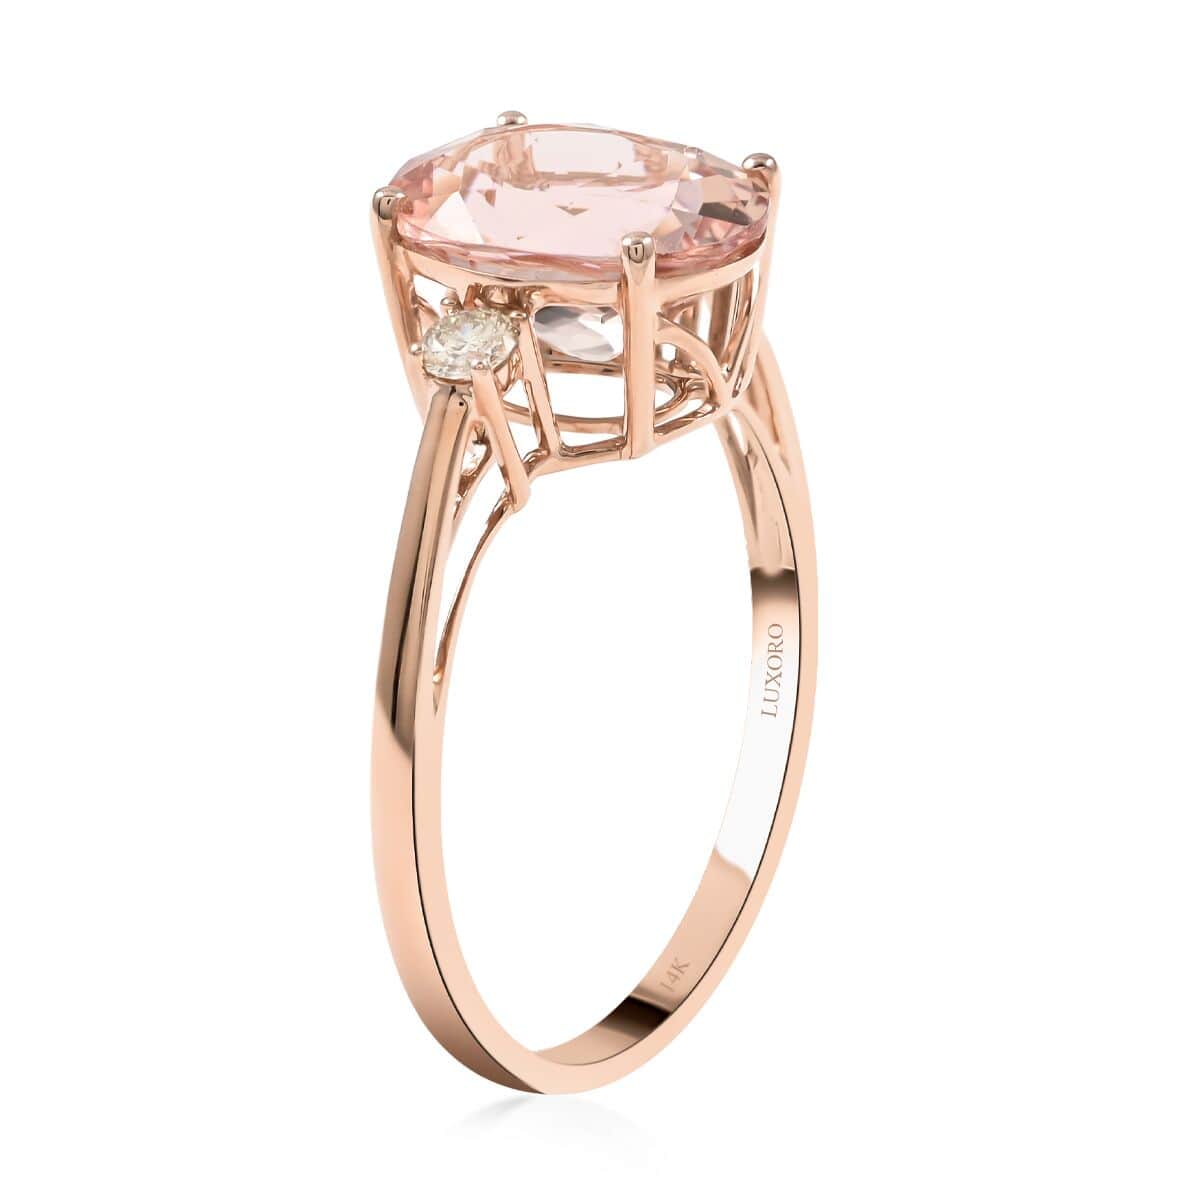 Certified & Appraised LUXORO 14K Rose Gold AAA Marropino Morganite, Diamond (G-H, I1) (0.17 cts) Ring (2.25 g) 3.55 ctw image number 3